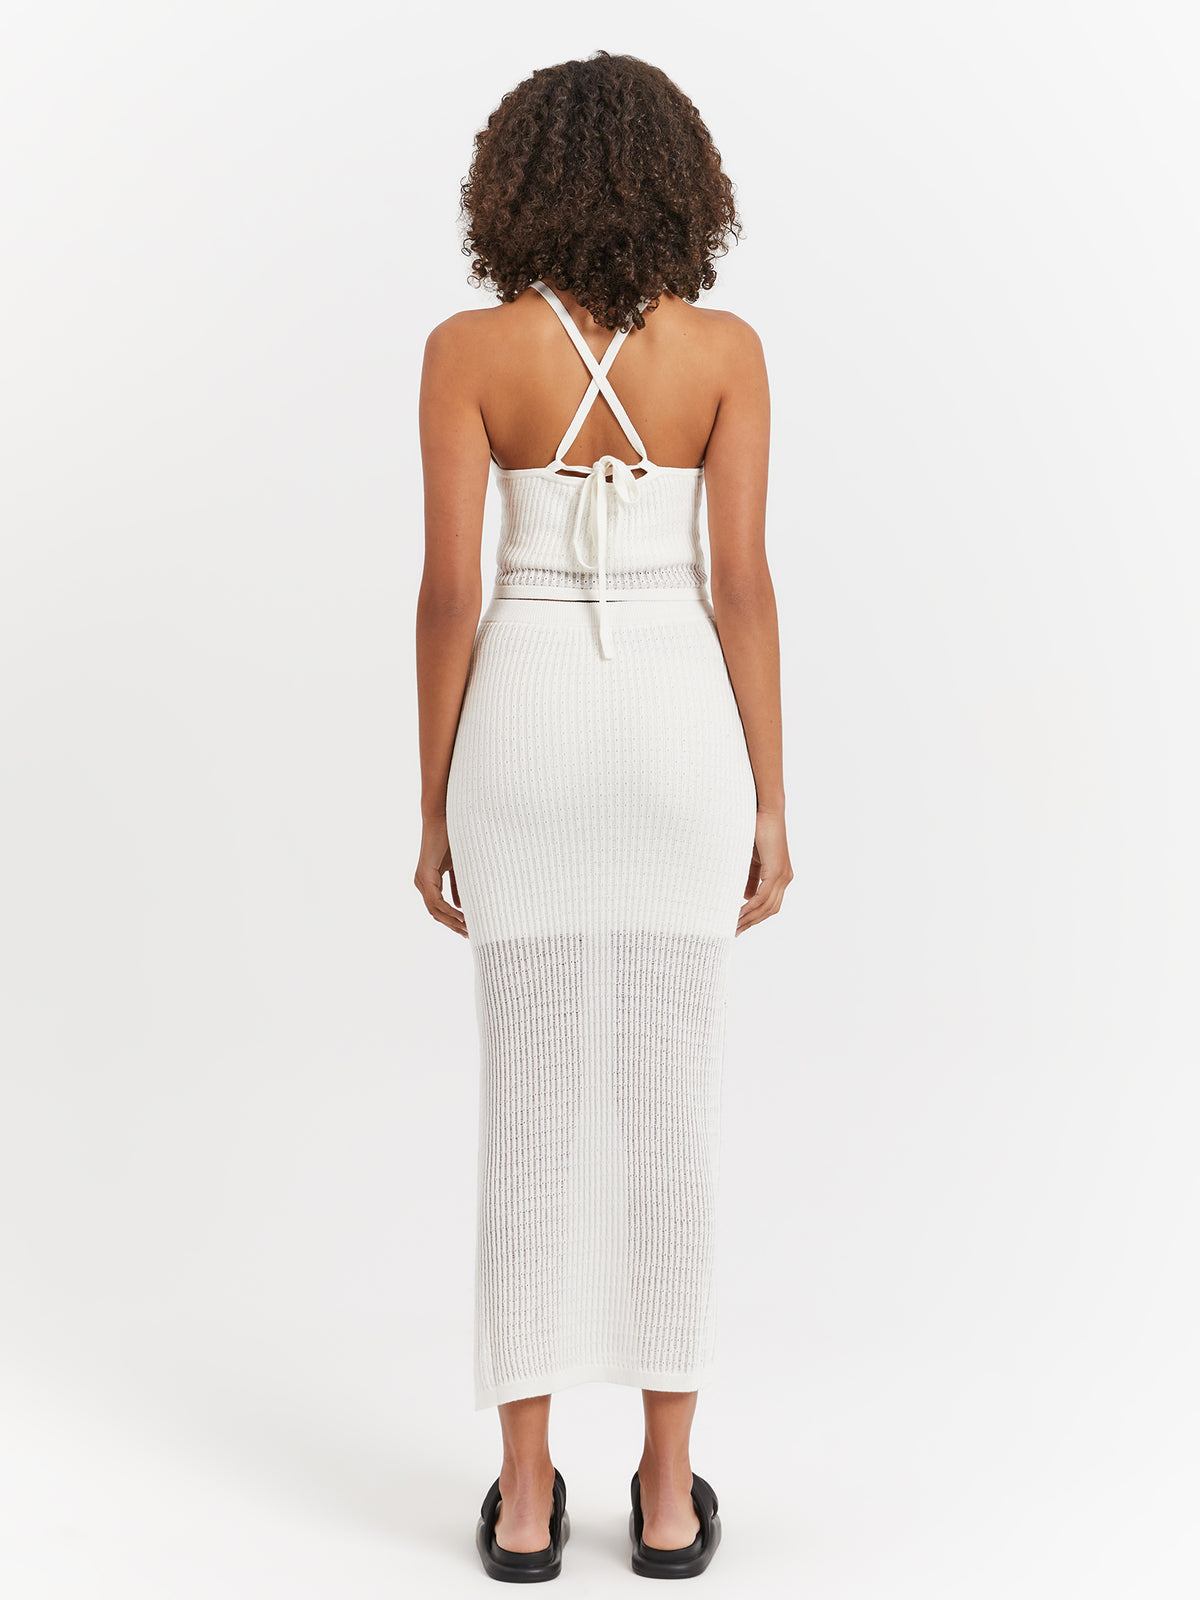 Alani Knit Halter Top in Off White